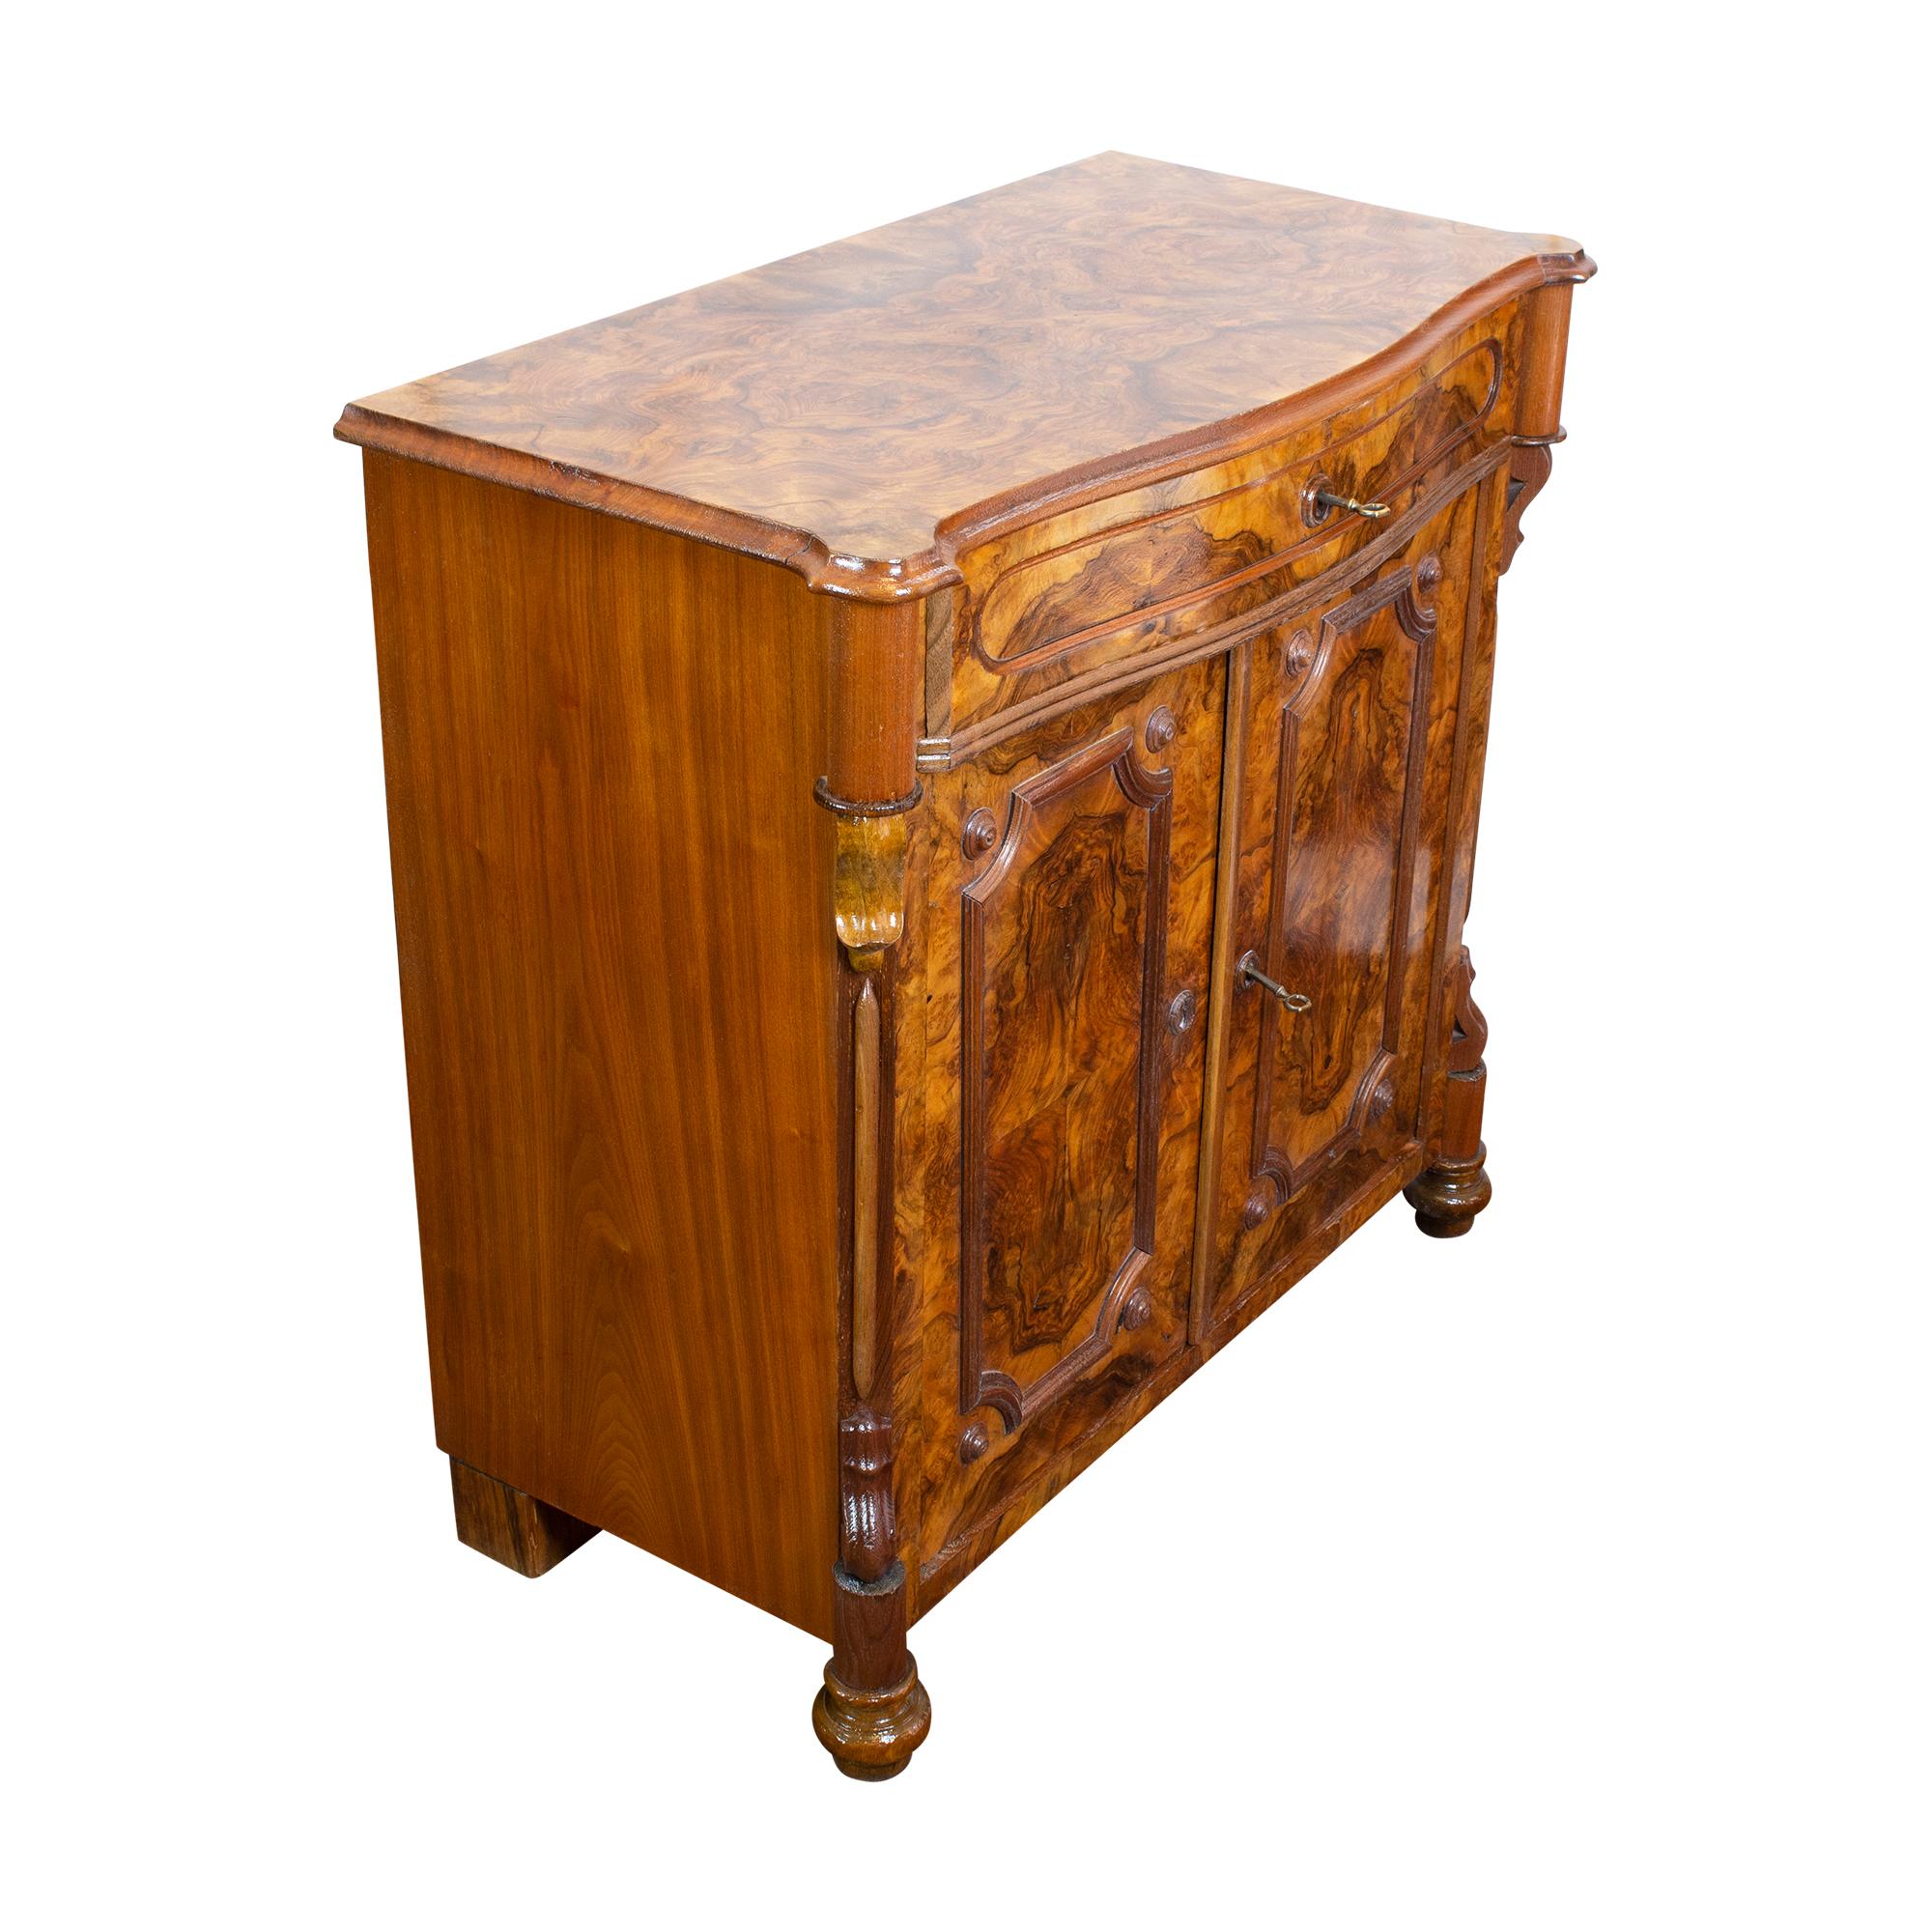 Discover the timeless charm of this exquisite Louis Philippe/Late Biedermeier half cabinet, crafted around 1850. This remarkable piece features a single drawer and two doors, offering ample storage space. Its rich walnut veneer adorns a sturdy